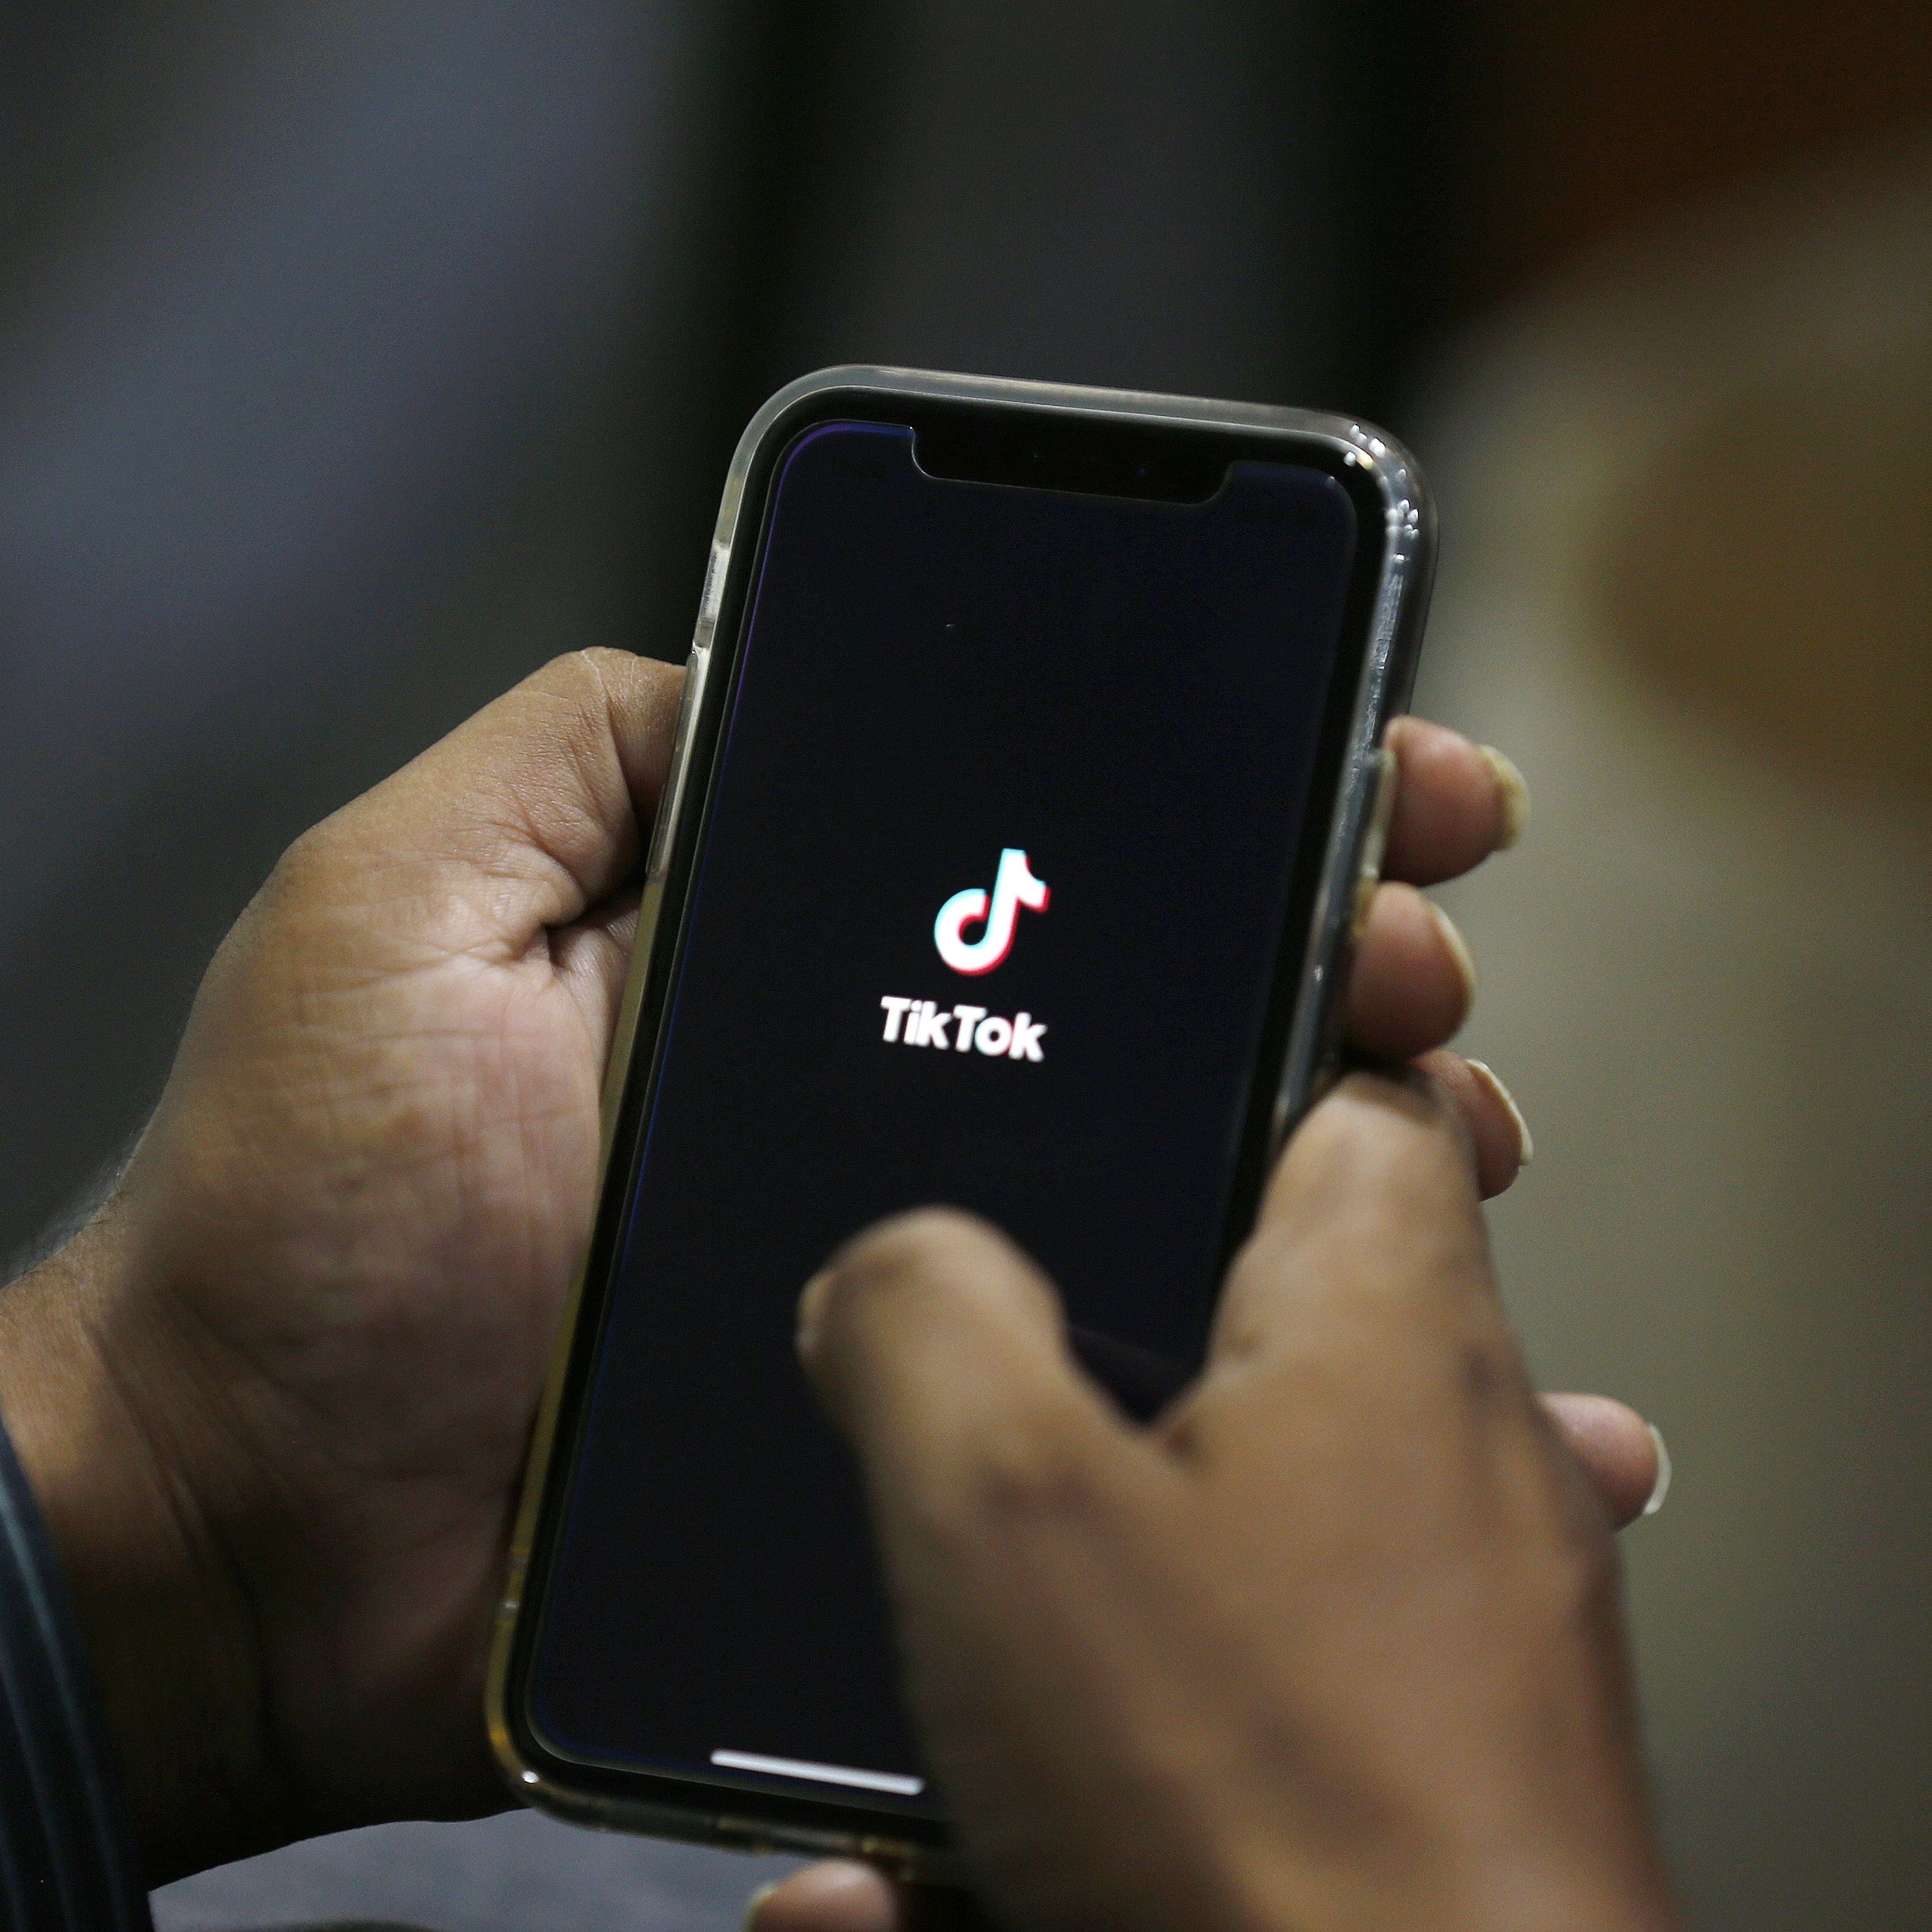 FILE - In this July 21, 2020 file photo, a man opens social media app 'TikTok' on his cell phone, in Islamabad, Pakistan. President Donald Trump said Saturday, Sept. 19, 2020 heâ€™s given his â€œblessingâ€ to a proposed deal between Oracle and Walmart for the U.S. operations of TikTok, the Chinese-owned app heâ€™s targeted for national security and data privacy concerns. (AP Photo/Anjum Naveed, File)